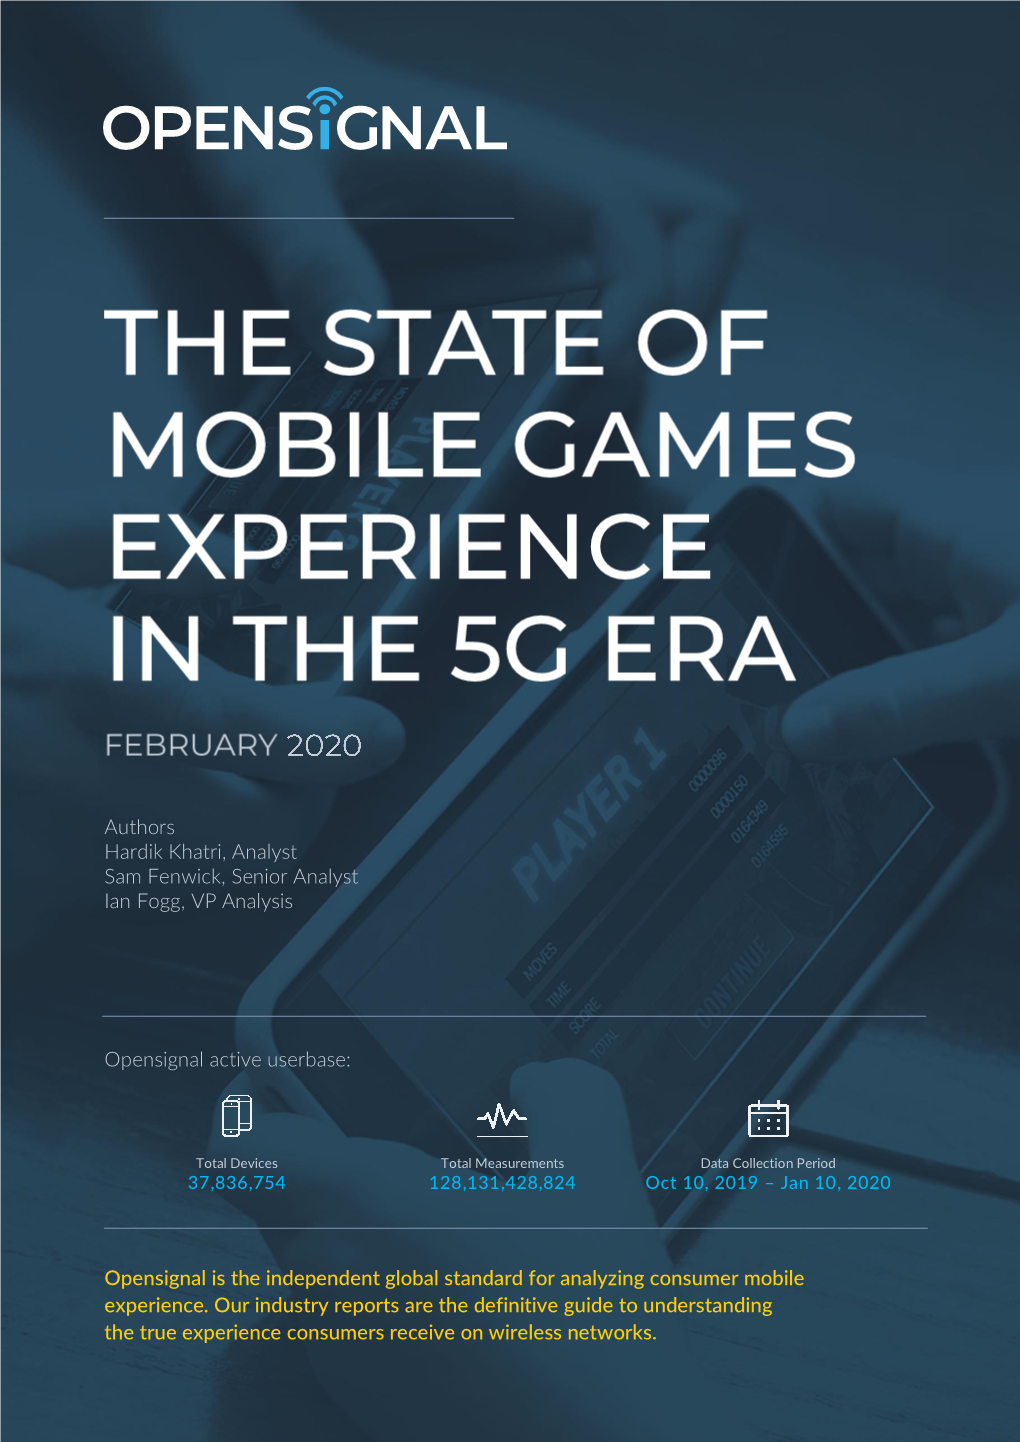 State of the Mobile Games Experience in the 5G